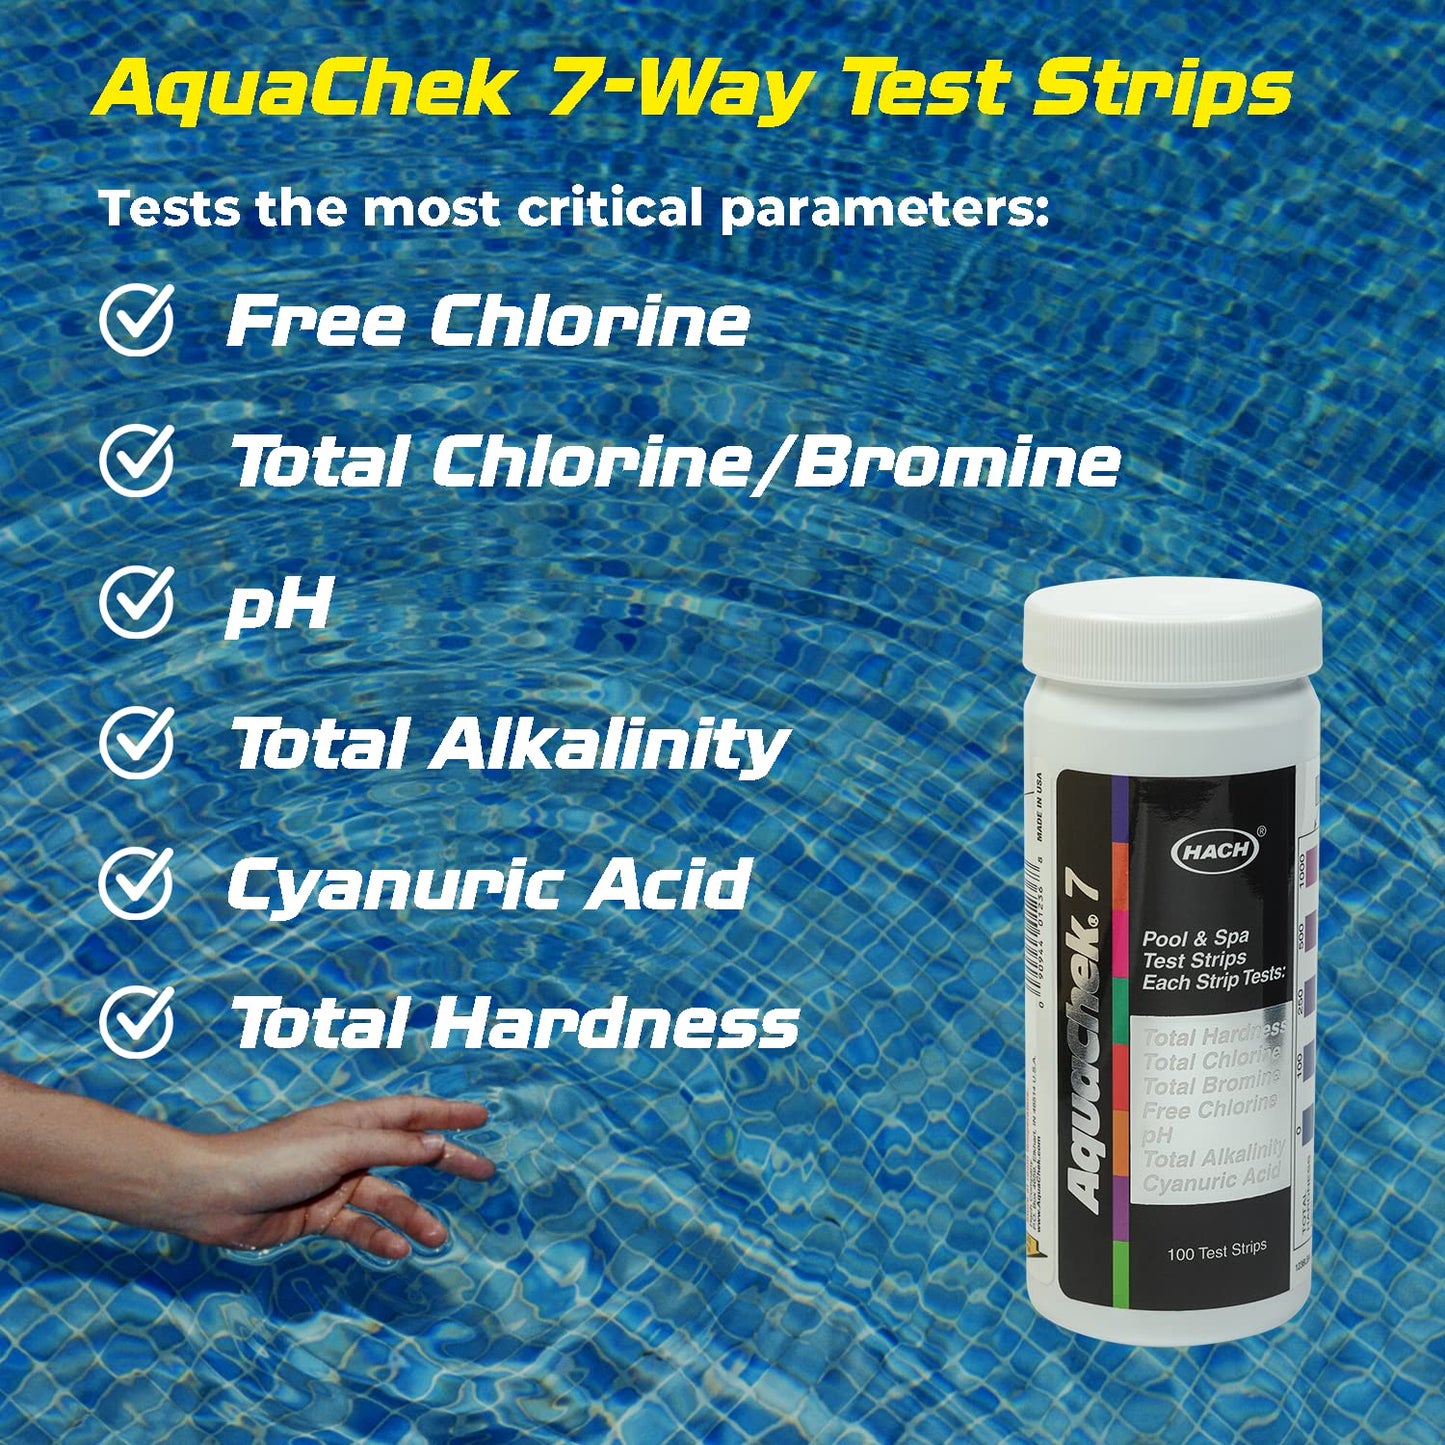 AquaChek 7-Way Pool and Spa Test Strips - Silver Pool Test Strips For pH, Total Chlorine, Free Chlorine, Bromine, Alkalinity, Total Hardness, and Cyanuric Acid - Water Quality Testing Kit (100 Strips)